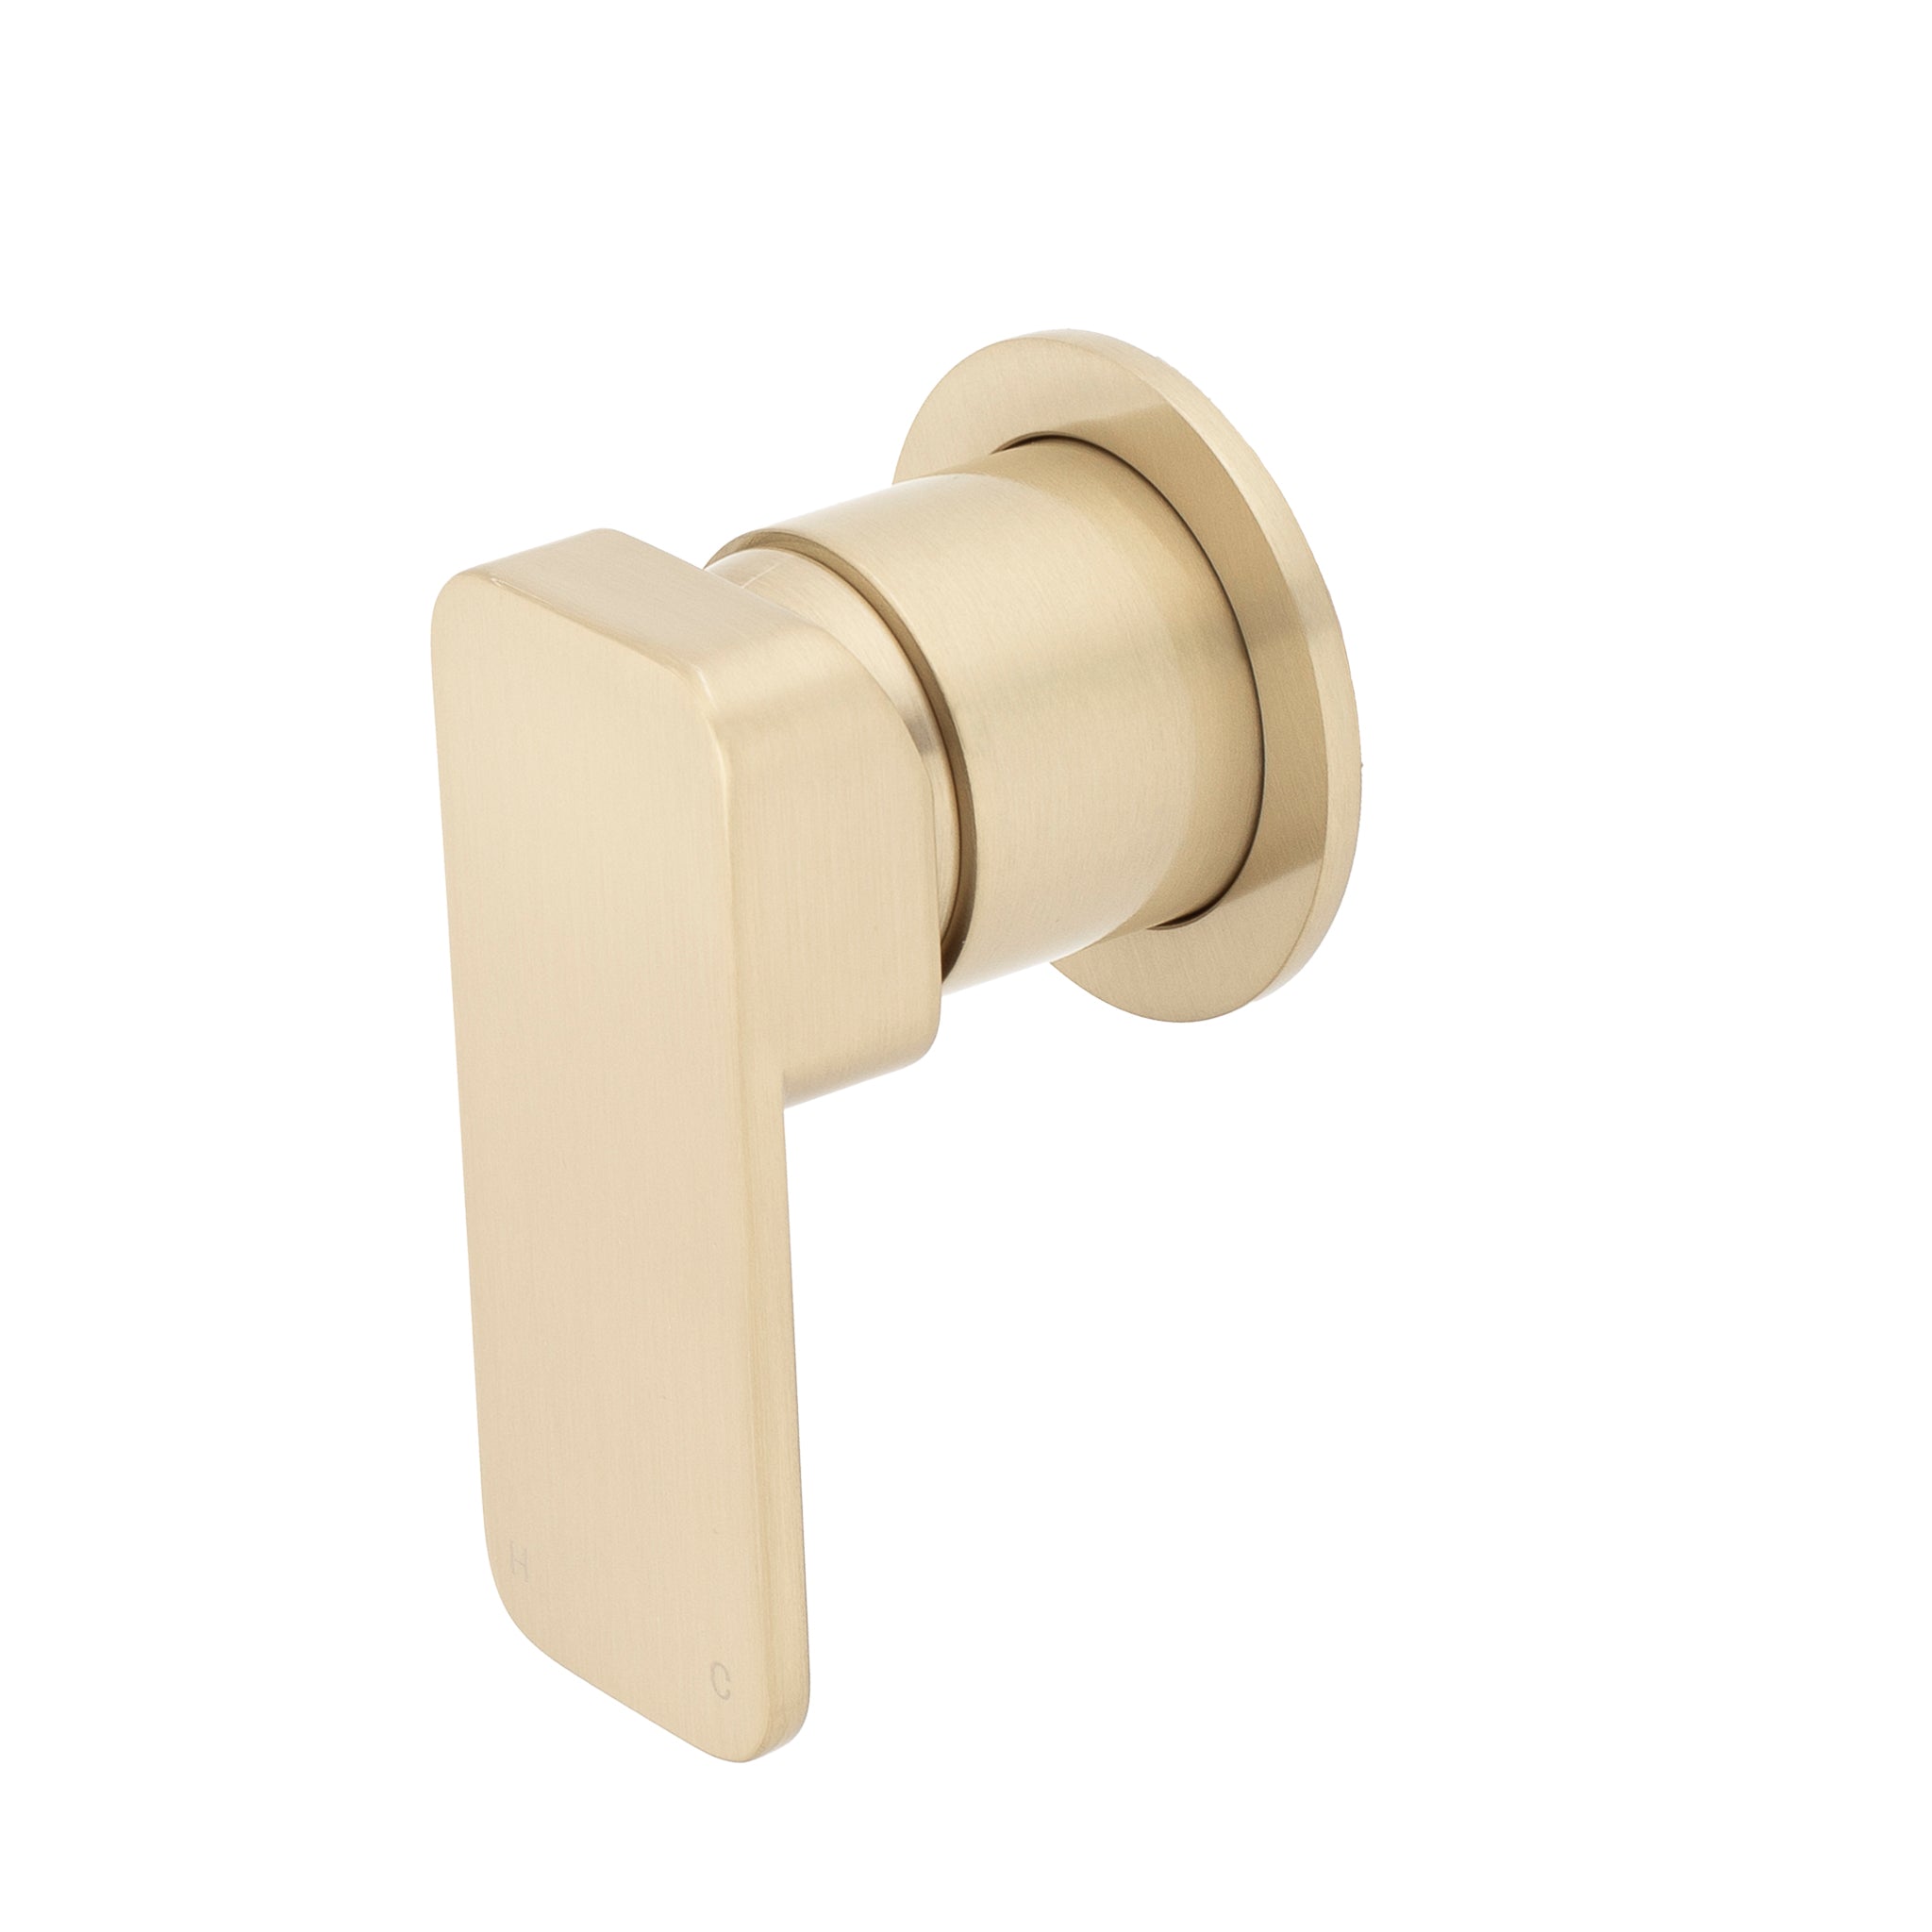 Kiki Shower/ Bath Wall Mixer with Round Plates, Brushed Brass (Gold)